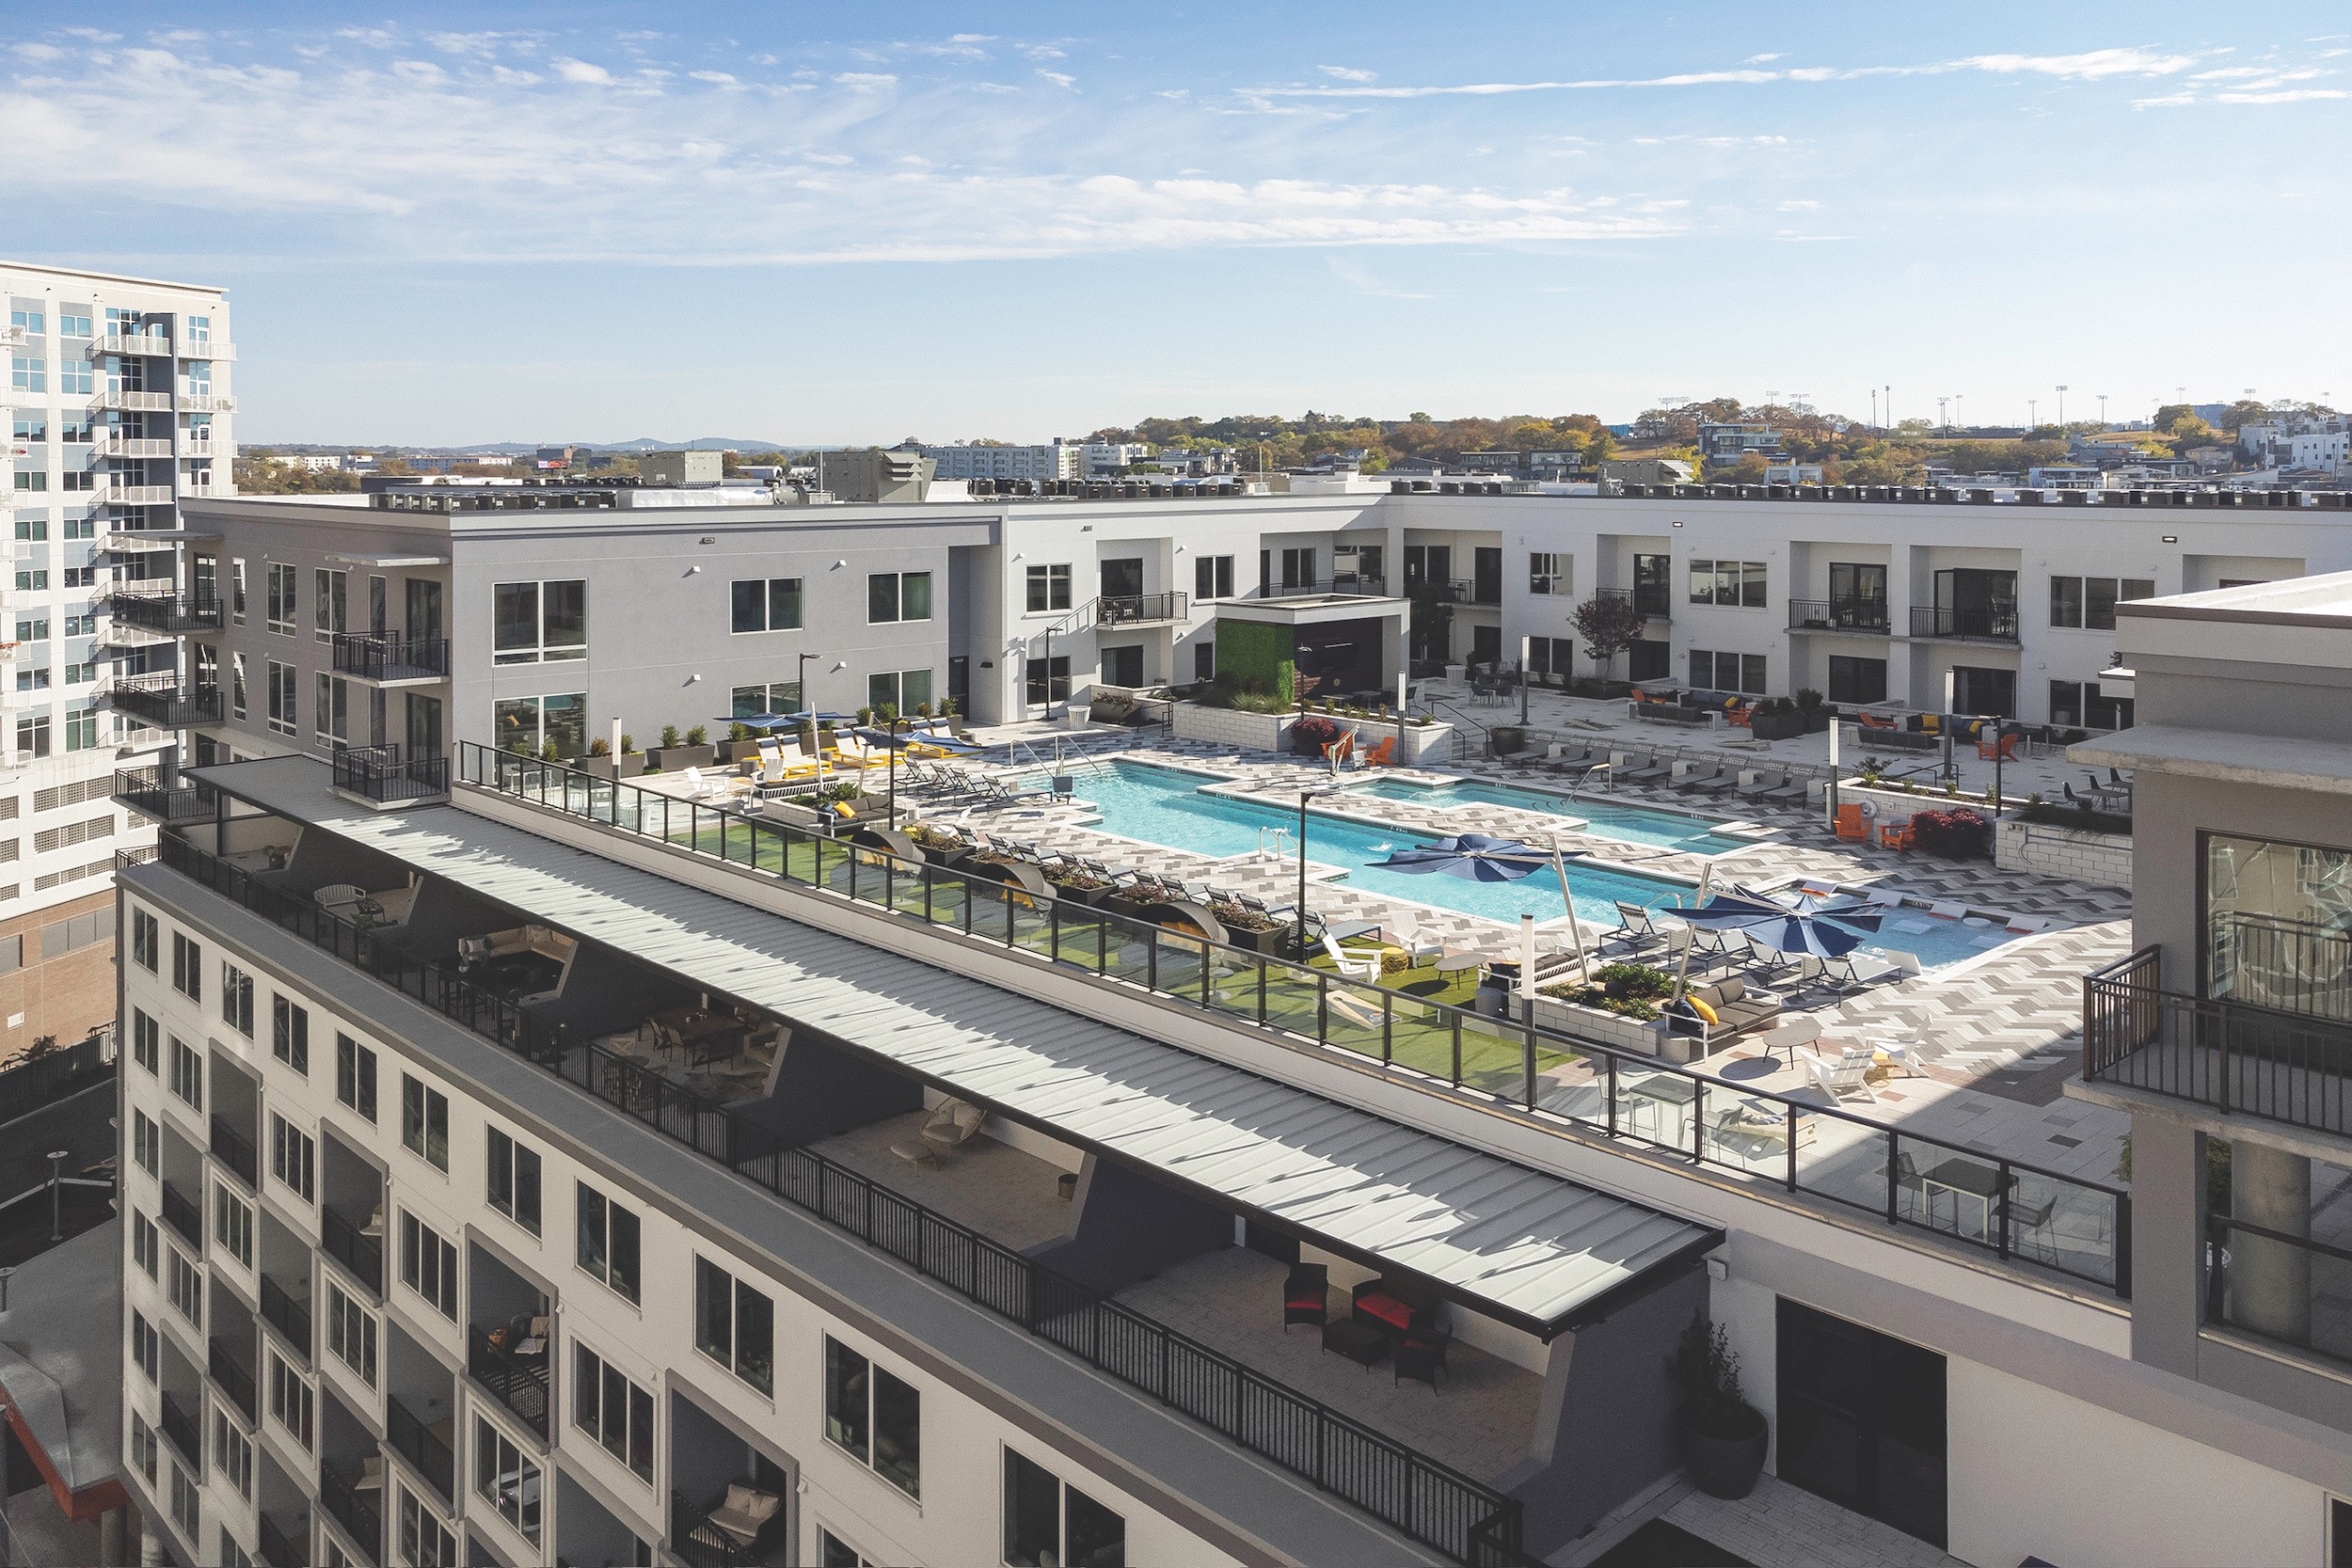 4. Aspire Gulch rooftop pool deck in Nashville Tennessee Photo Credit Morgan Nowland